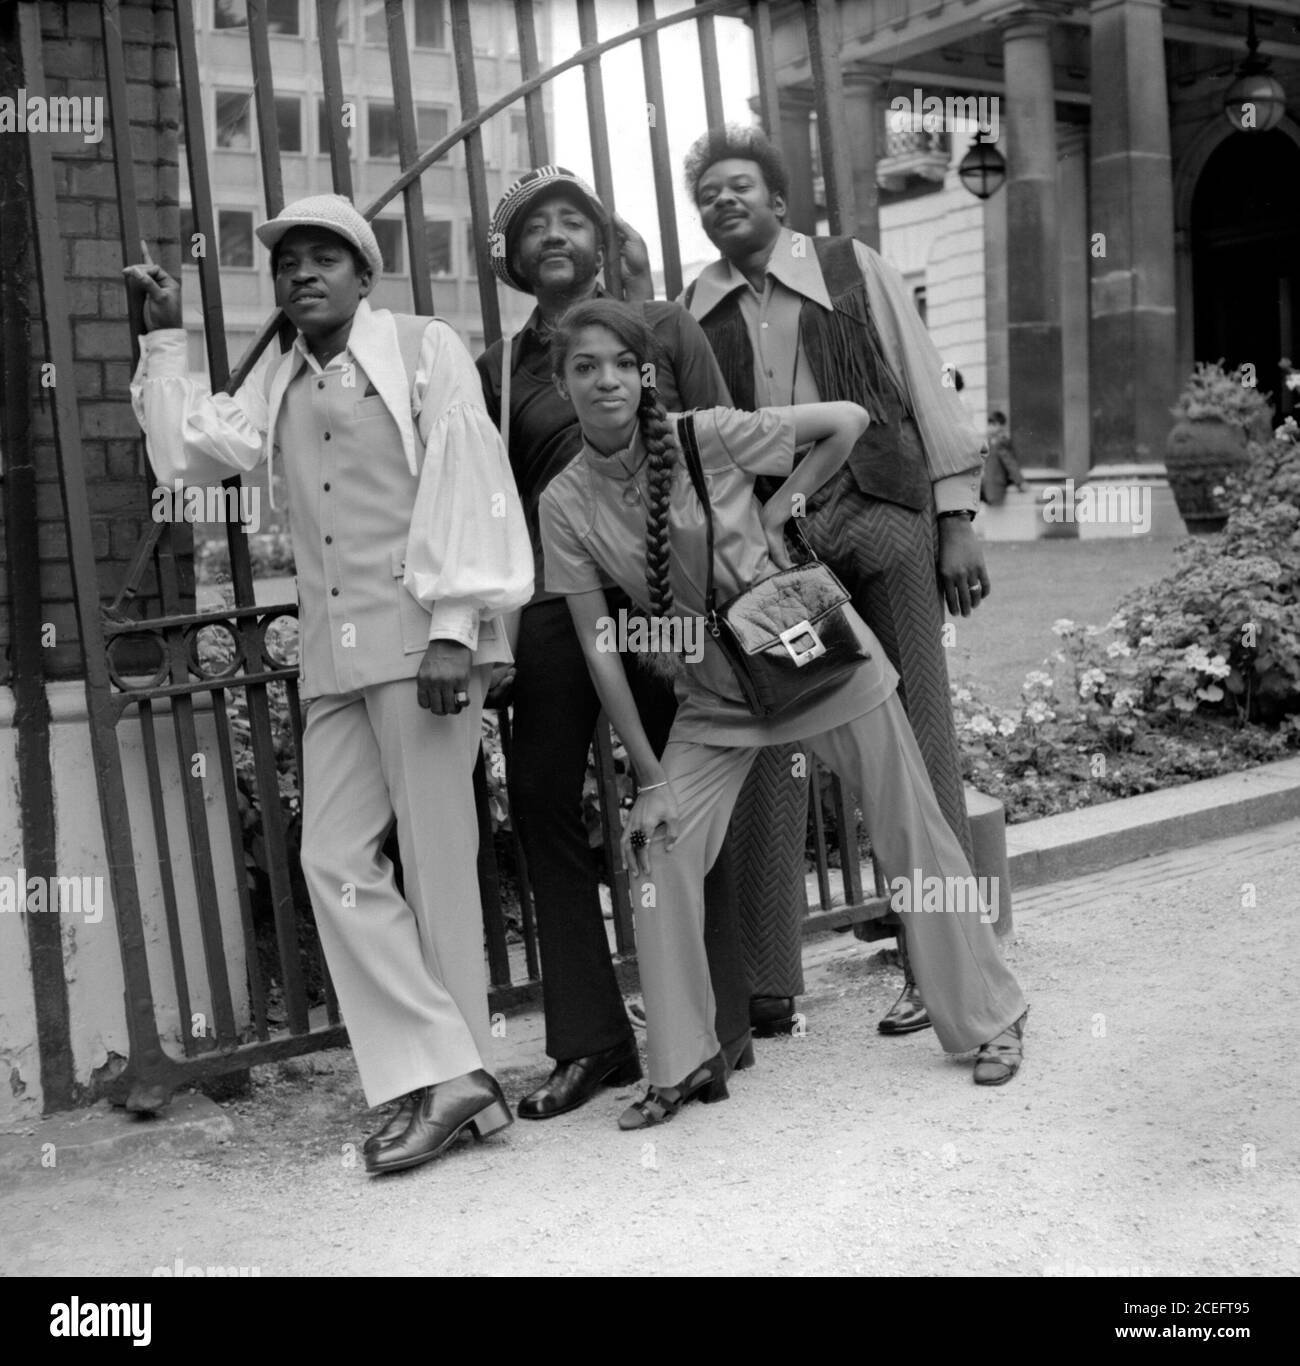 The American soul group The Elgins pose on a London street during their UK tour, following the success in the British charts of their song Heaven Must Have Sent You in 1971 Stock Photo